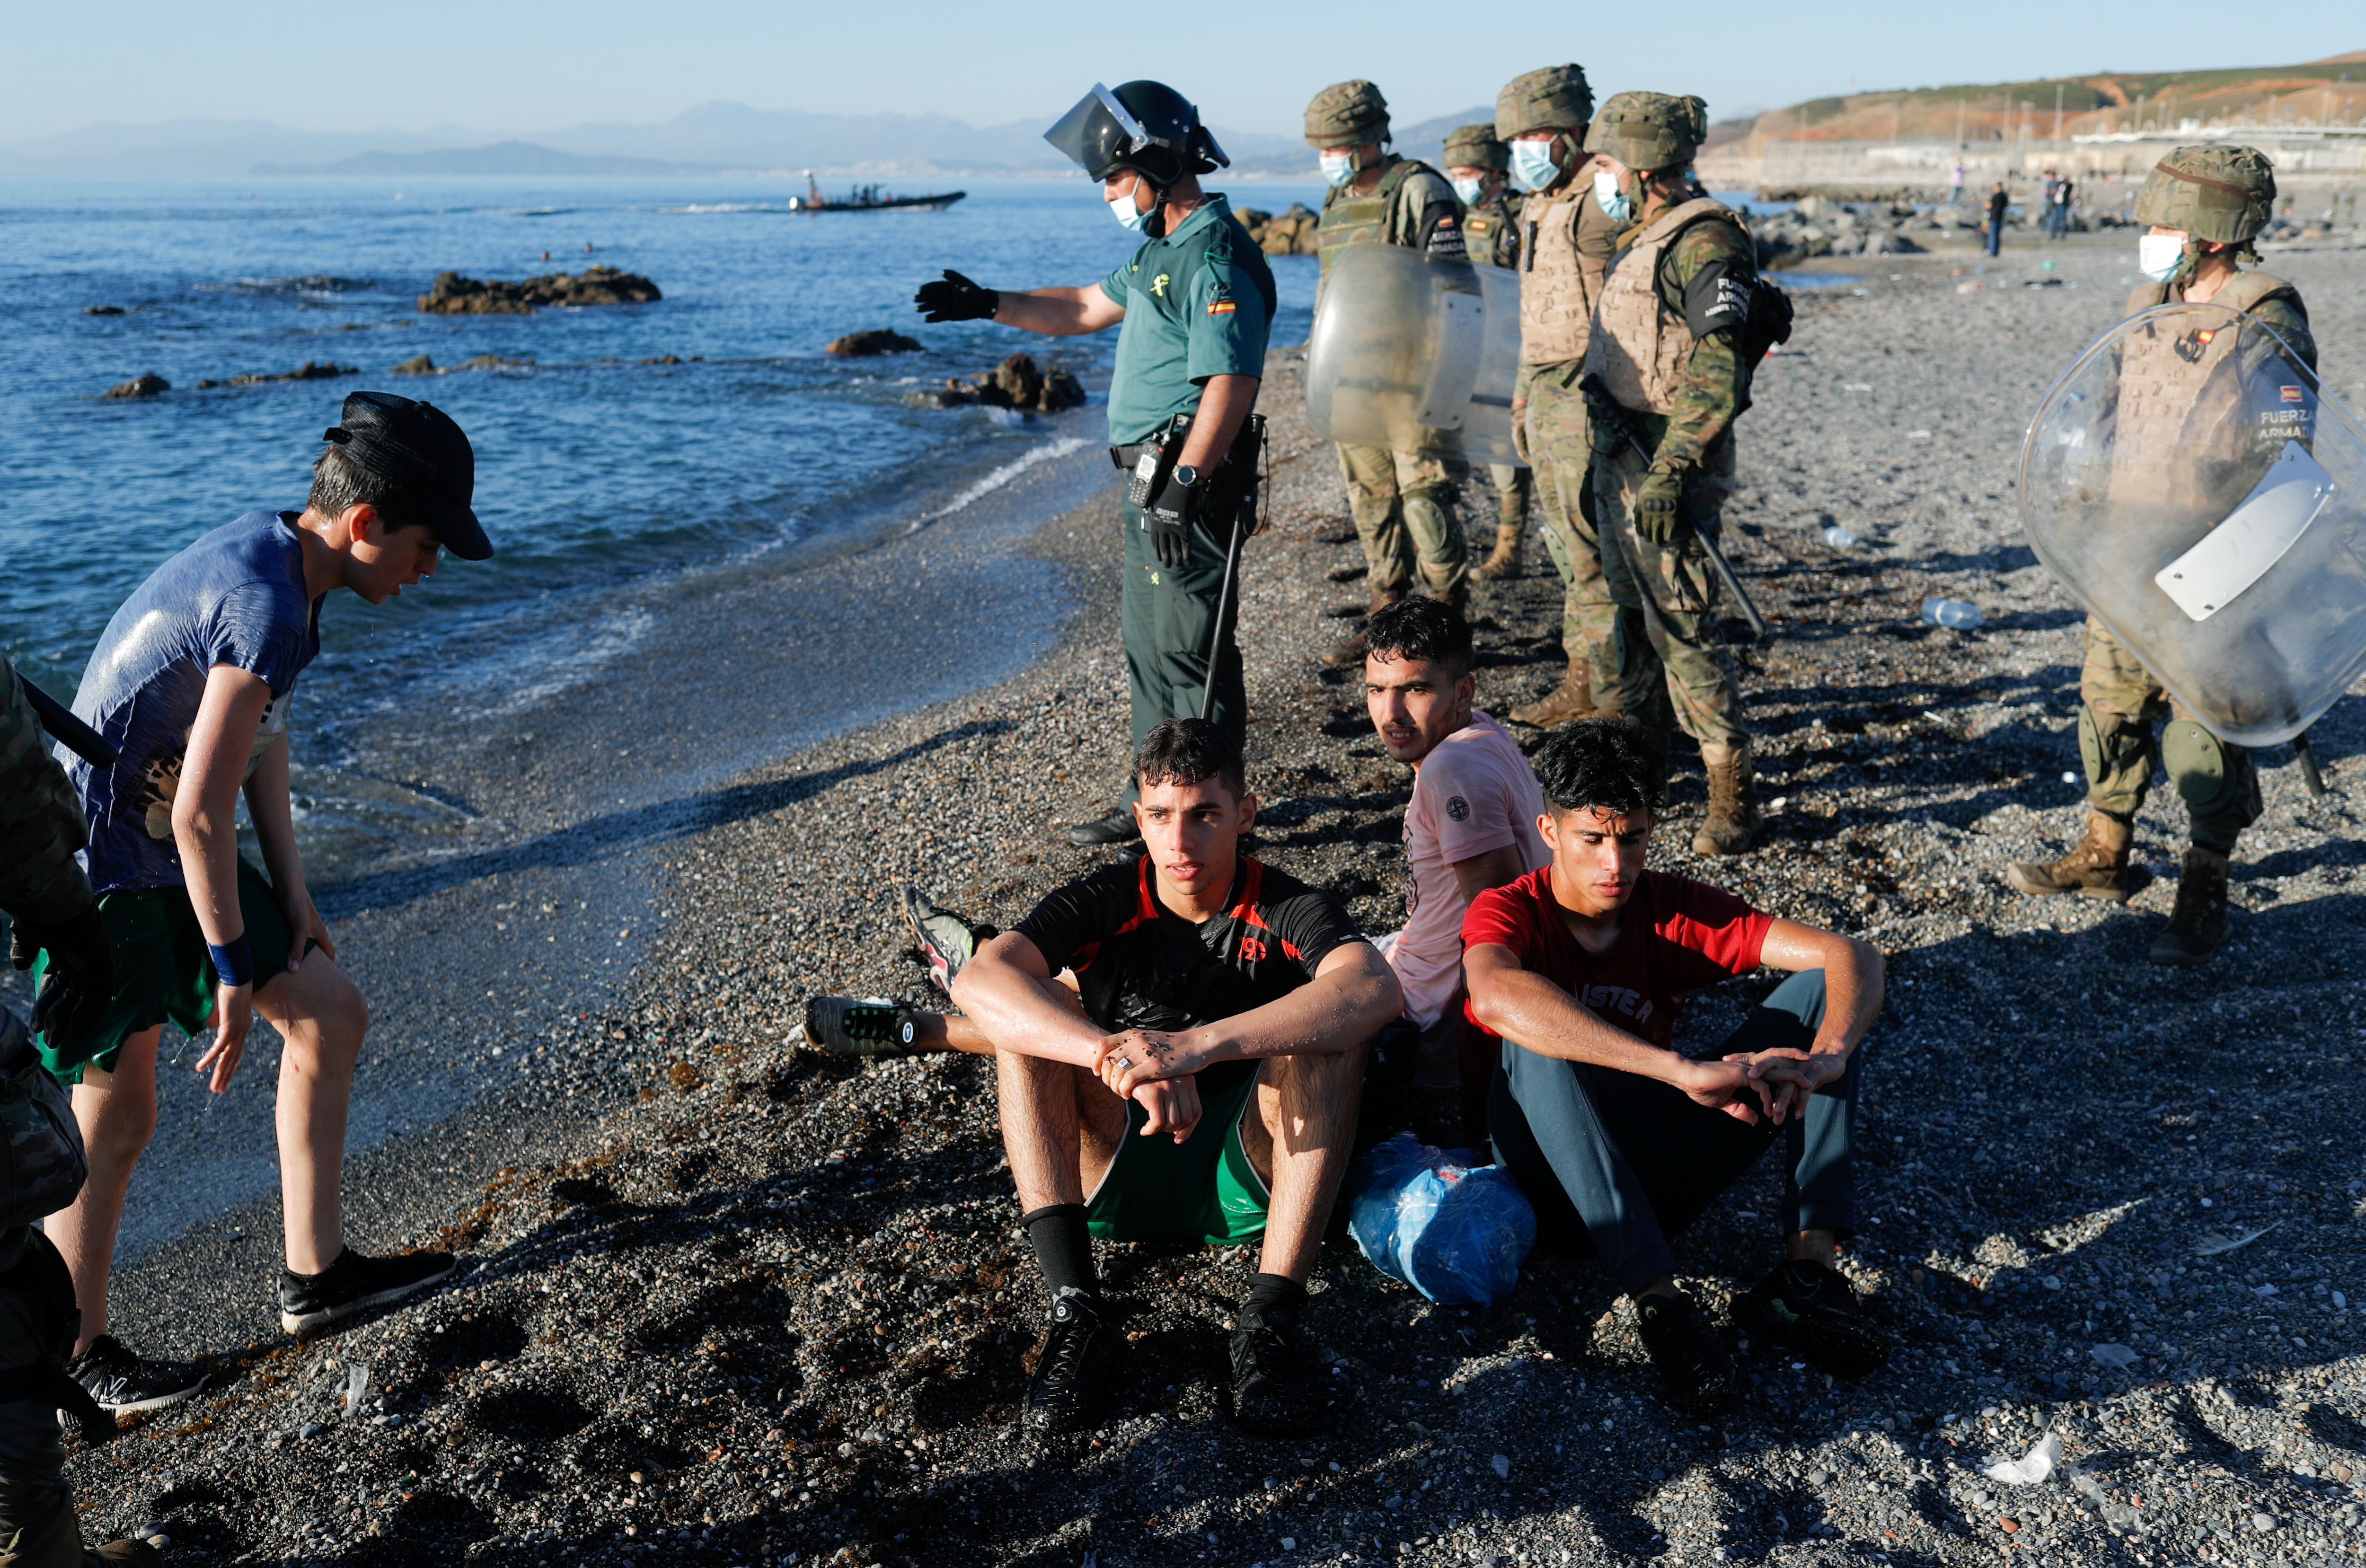 Spanish soldiers stand guard as Moroccan citizens sit at El Tarajal beach, near the fence between the Spanish-Moroccan border, after thousands of migrants swam across the border, in Ceuta, Spain, May 19, 2021. REUTERS/Jon Nazca